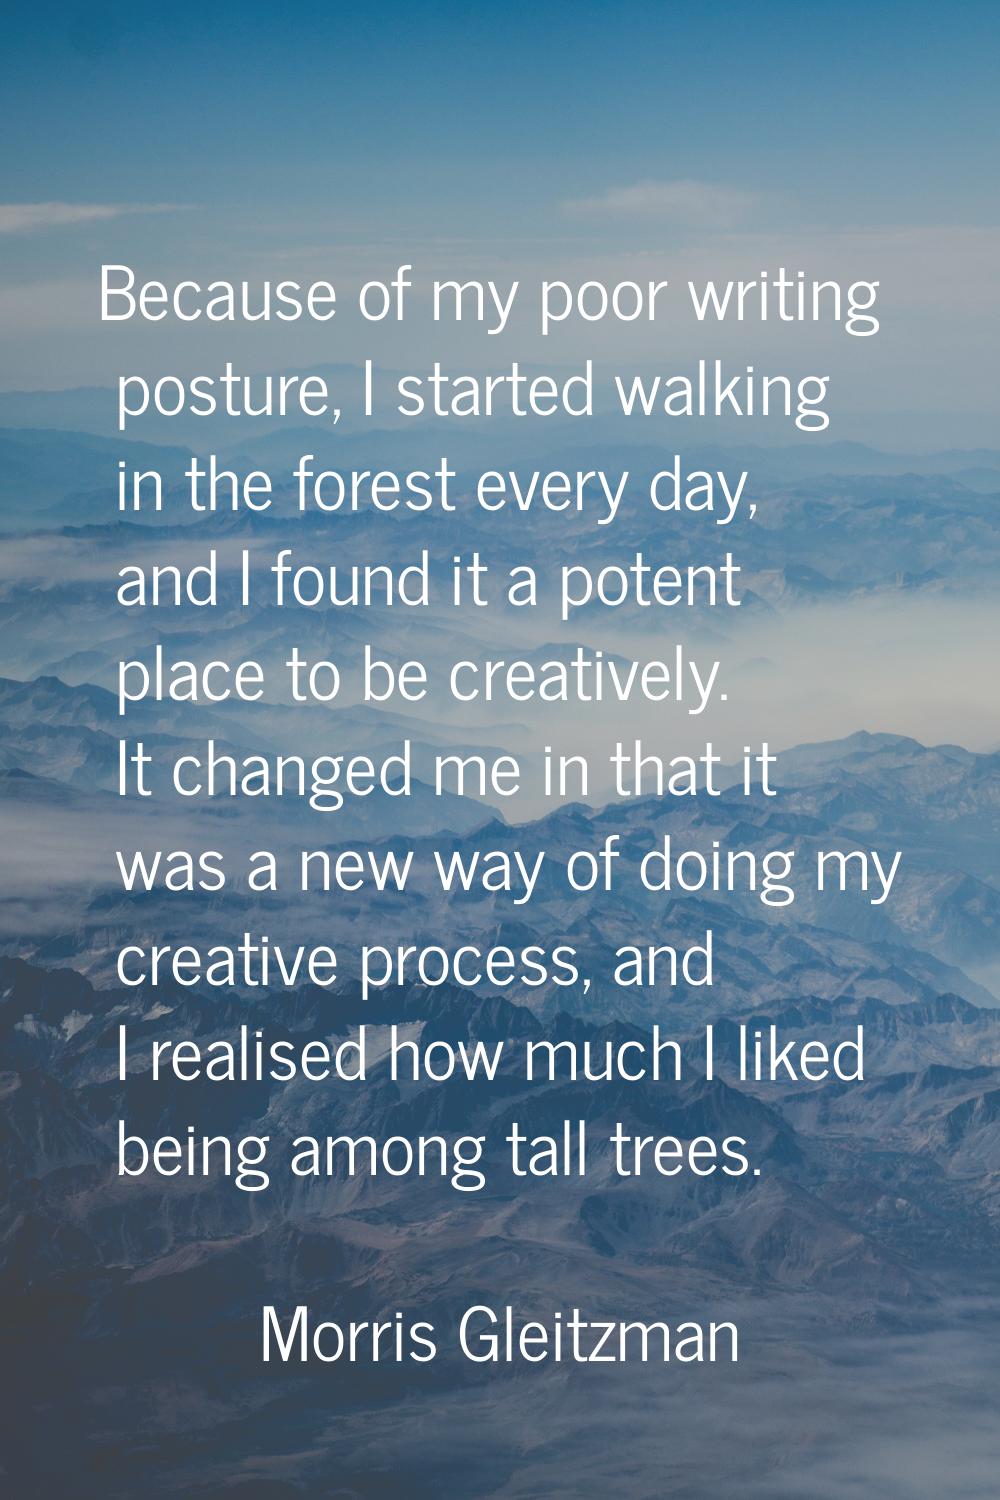 Because of my poor writing posture, I started walking in the forest every day, and I found it a pot